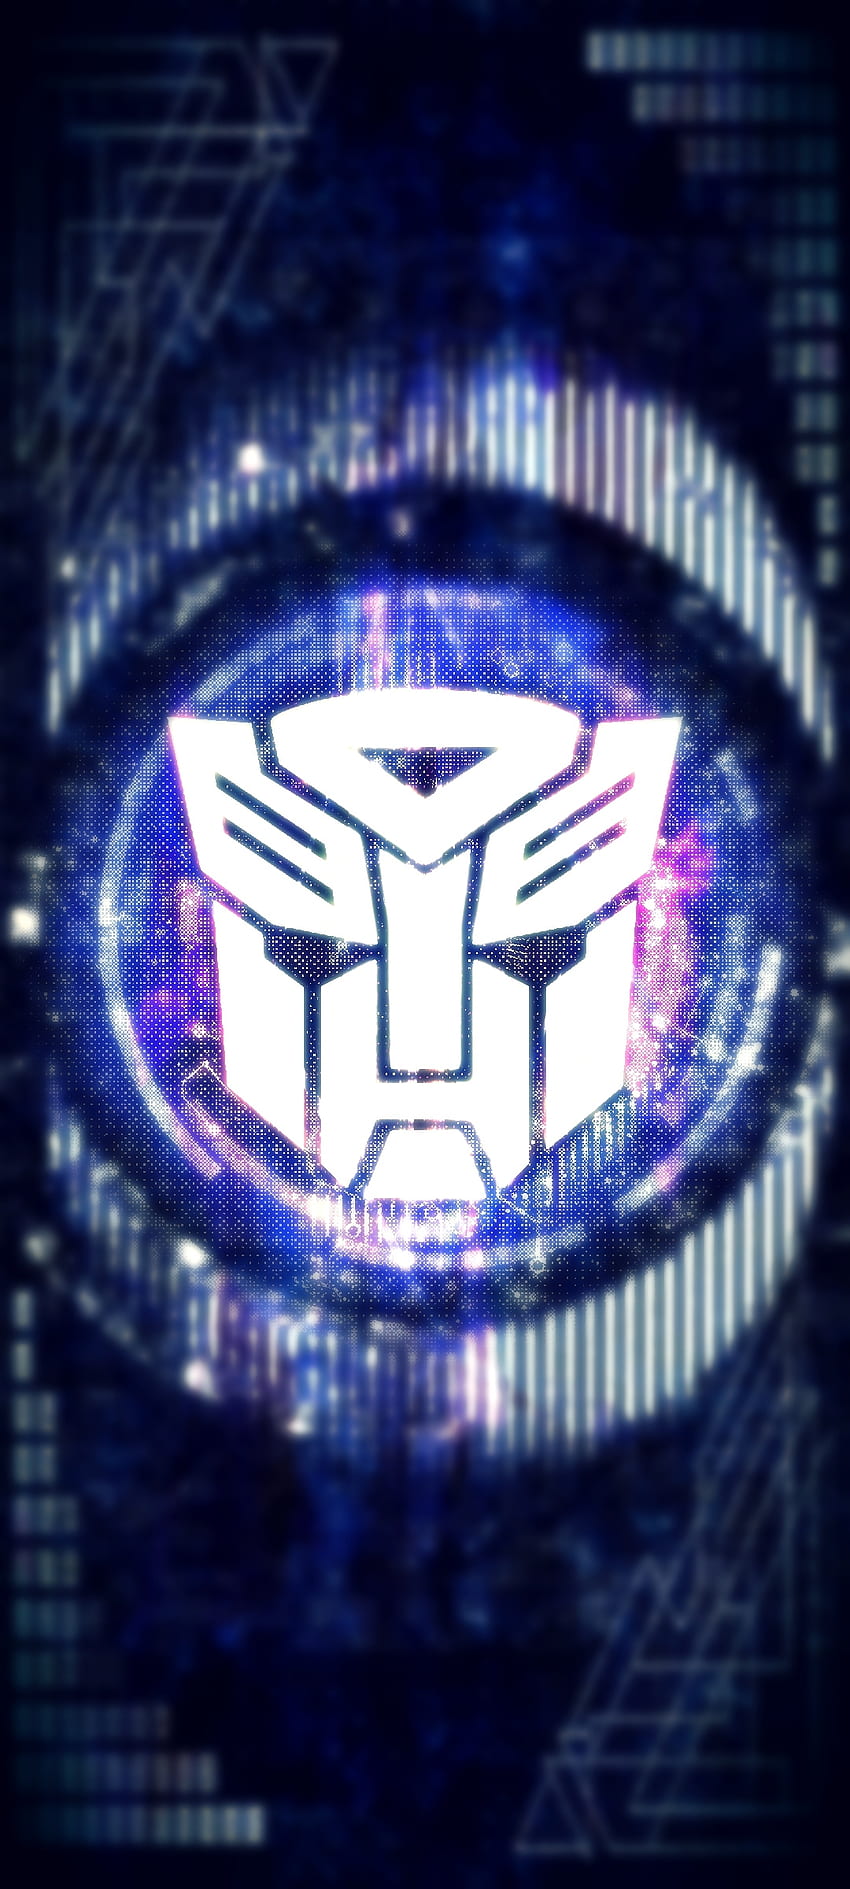 Autobots 1080P 2k 4k HD wallpapers backgrounds free download  Rare  Gallery